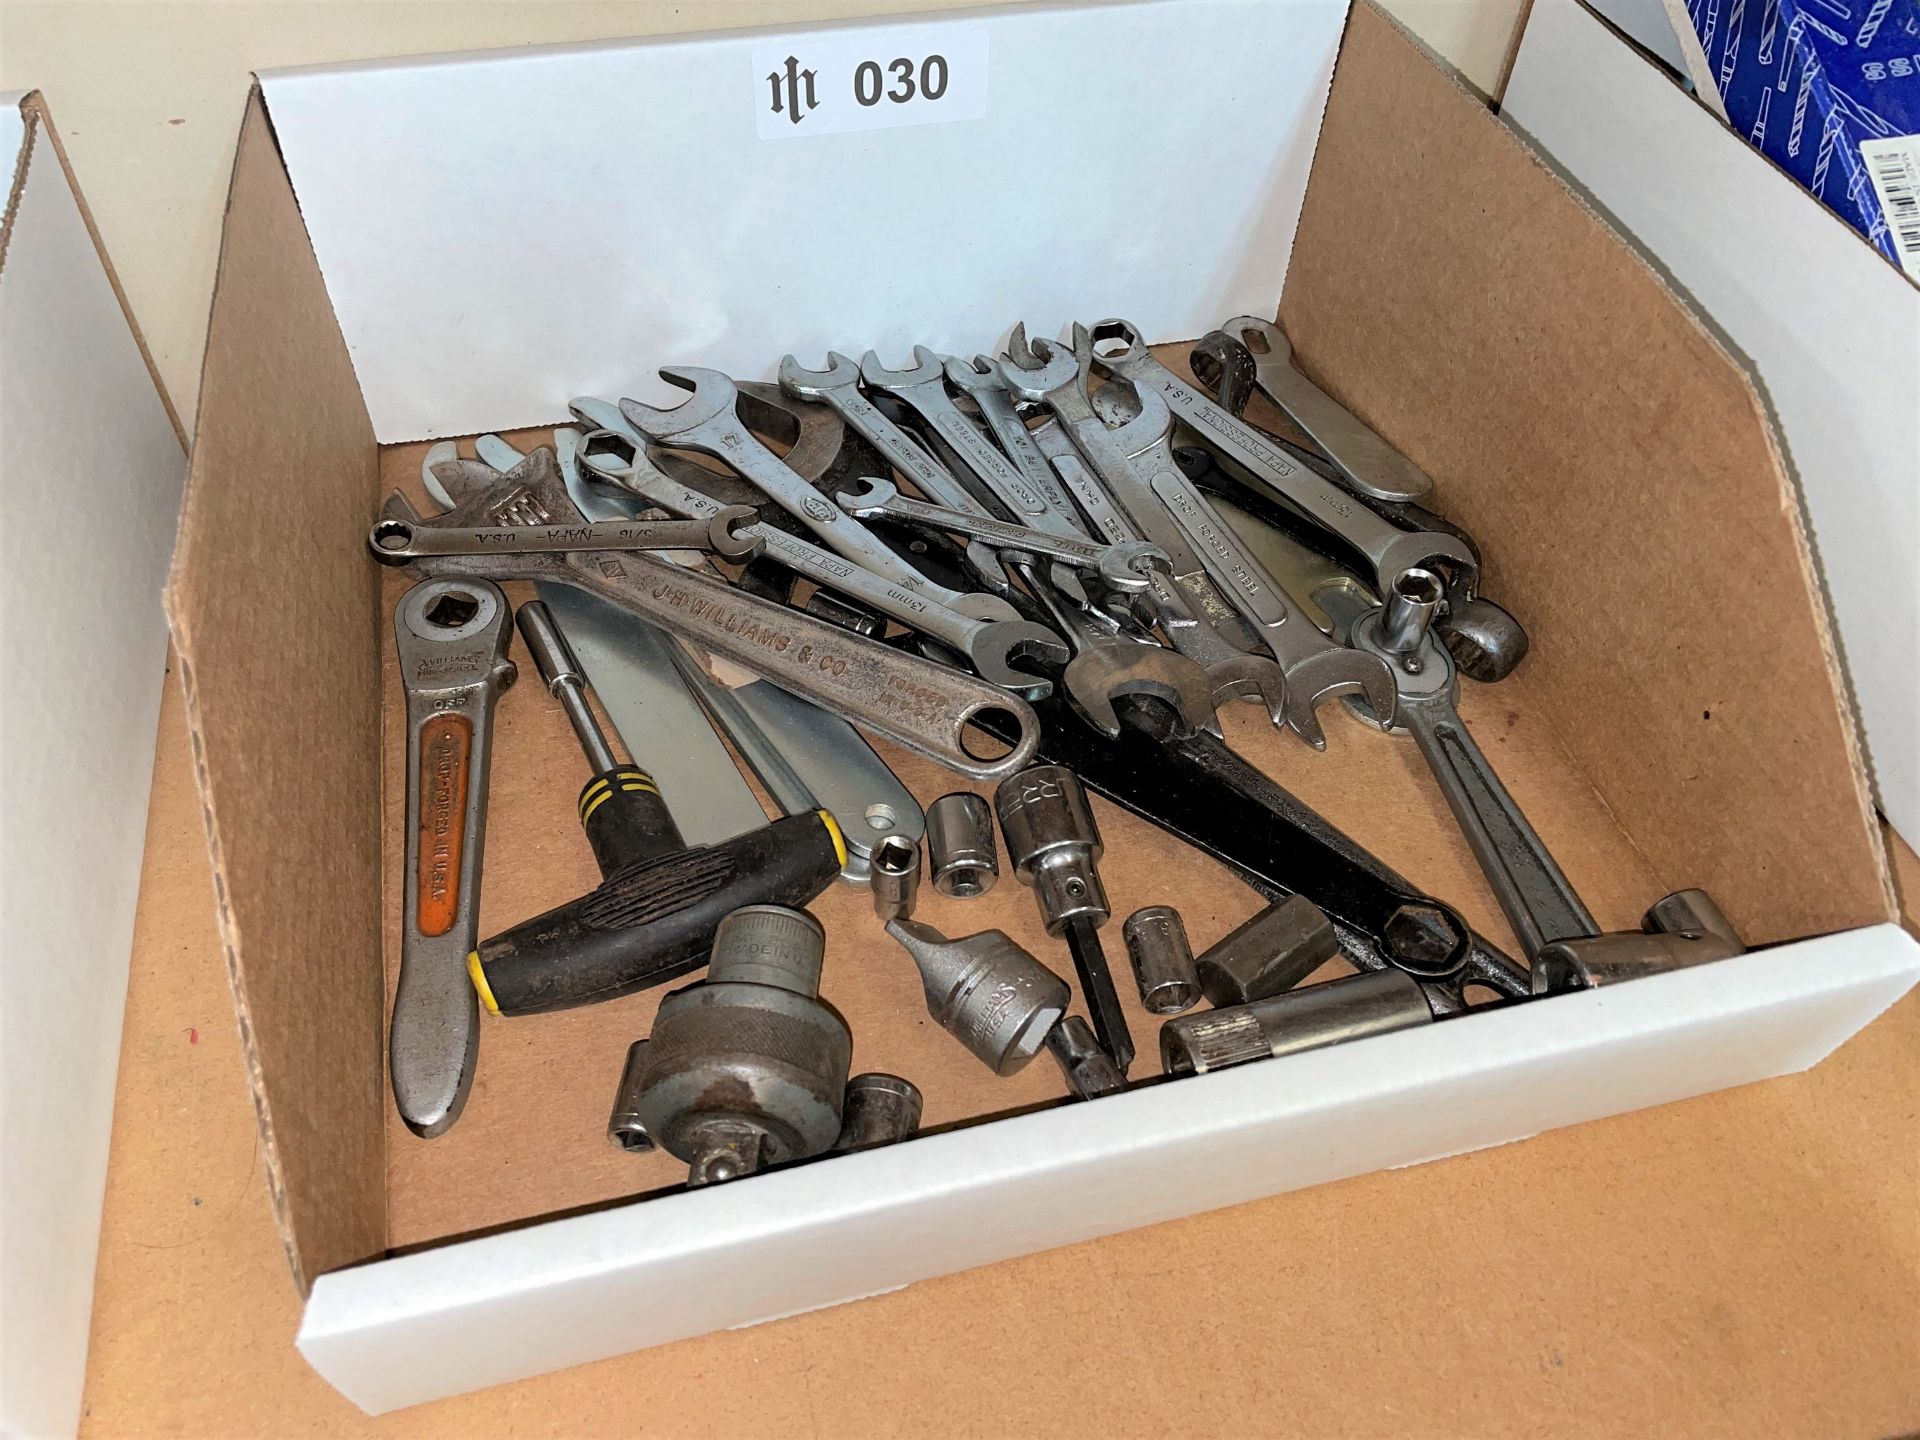 Lot of Various Wrenches